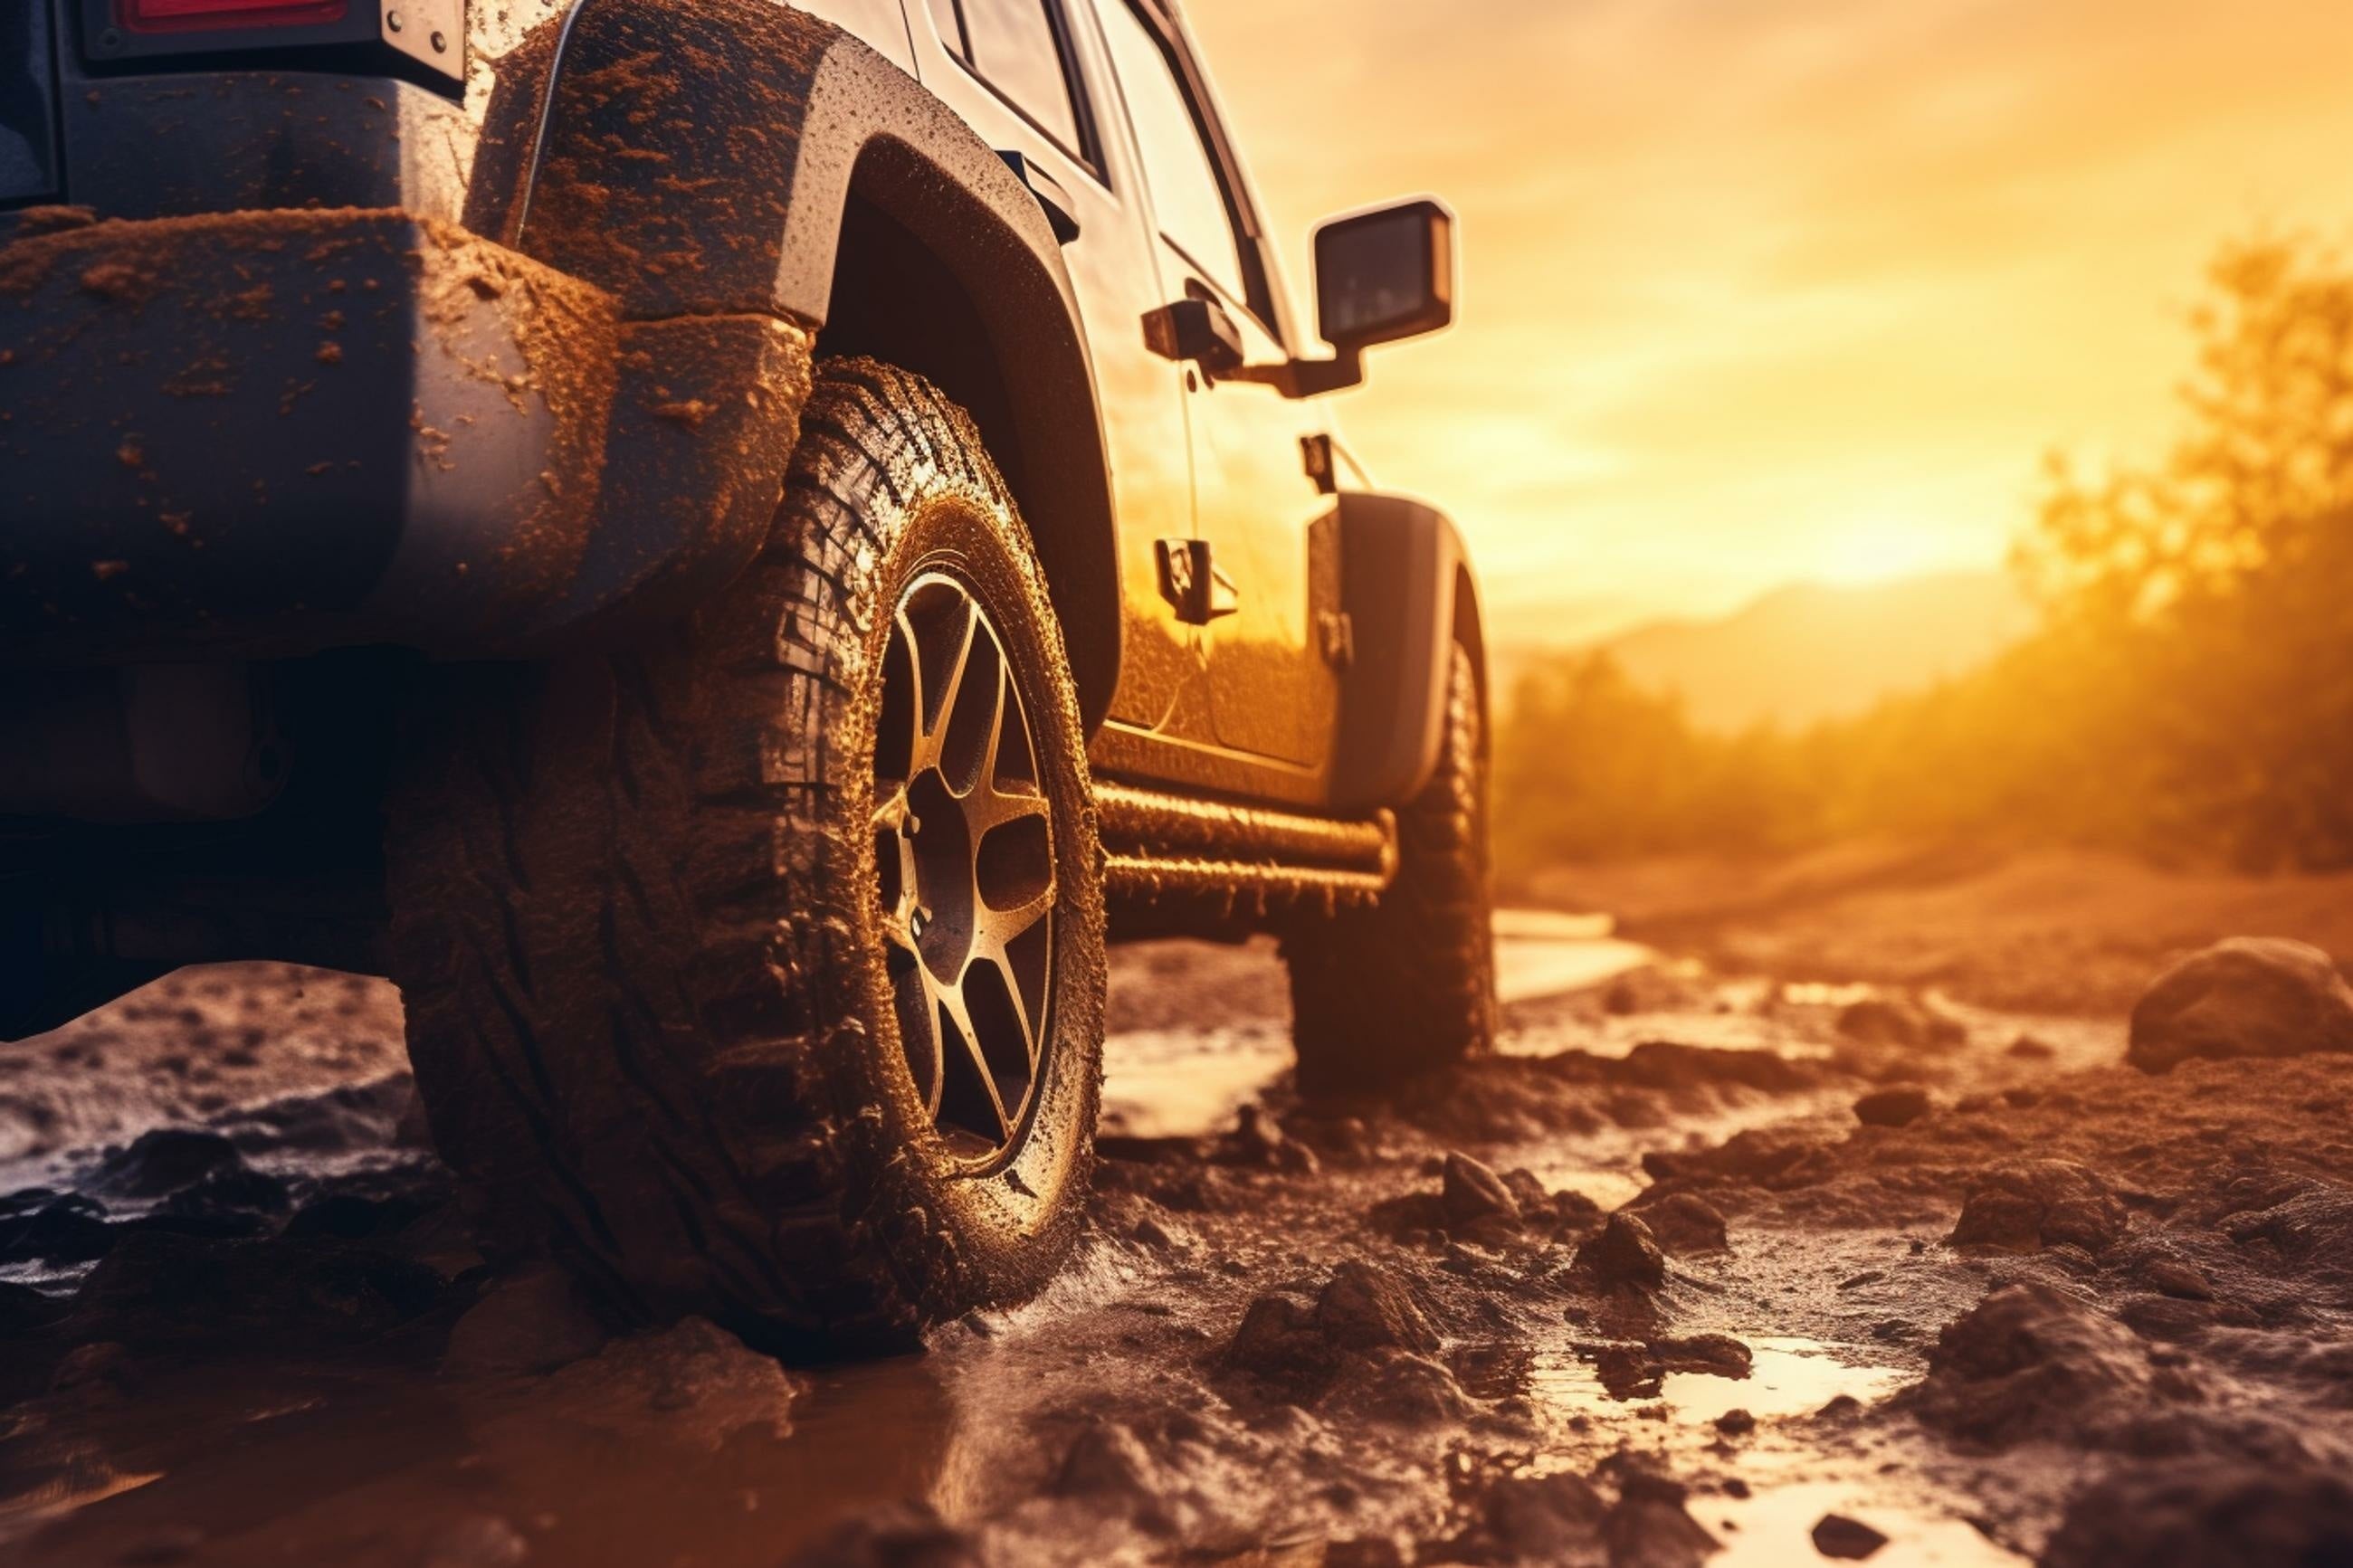 Trail Blazers: Top 5 Must-Explore Off-Road Trails on the West Coast